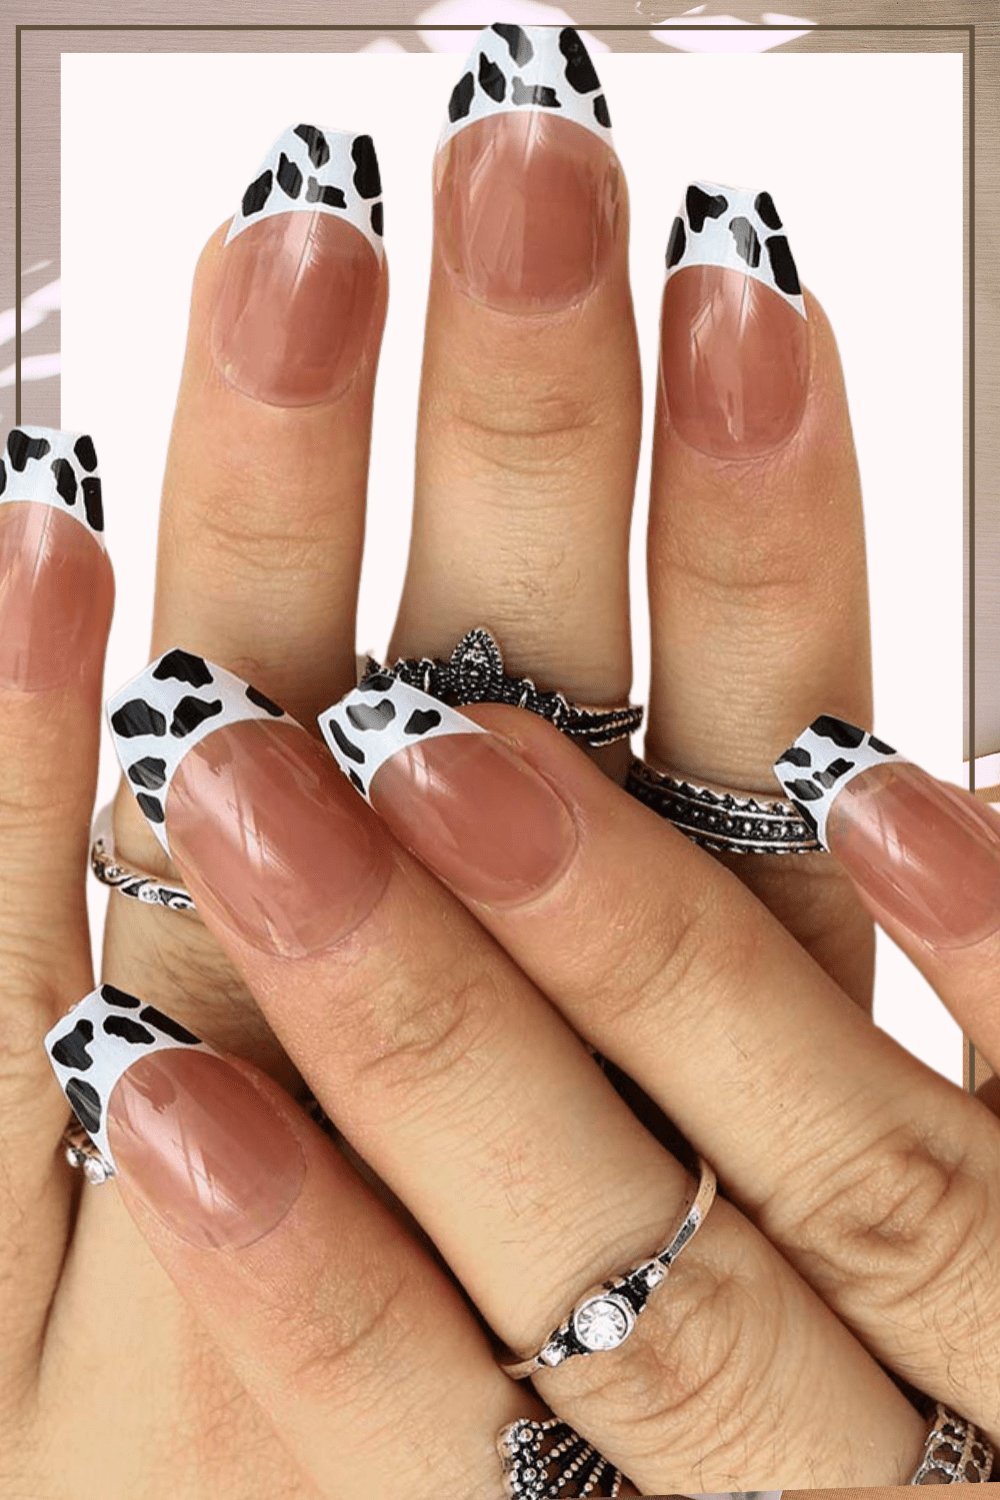 HOW TO: COW PRINT NAILS (BEGINNER FRIENDLY) - YouTube